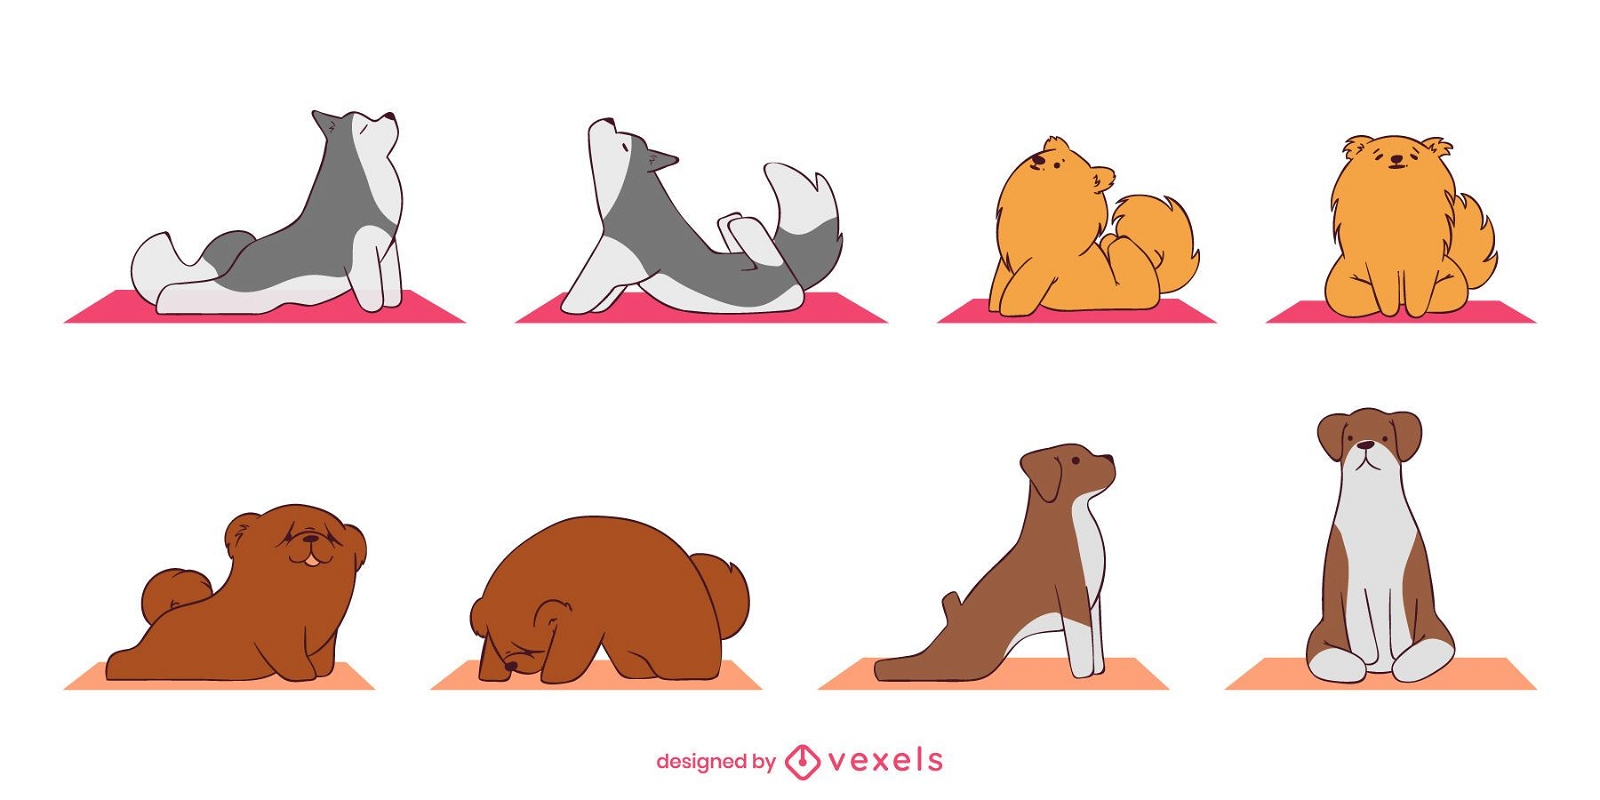 Yoga girl pose in doodle style. cute cartoon illustrations drawn people  12068532 PNG